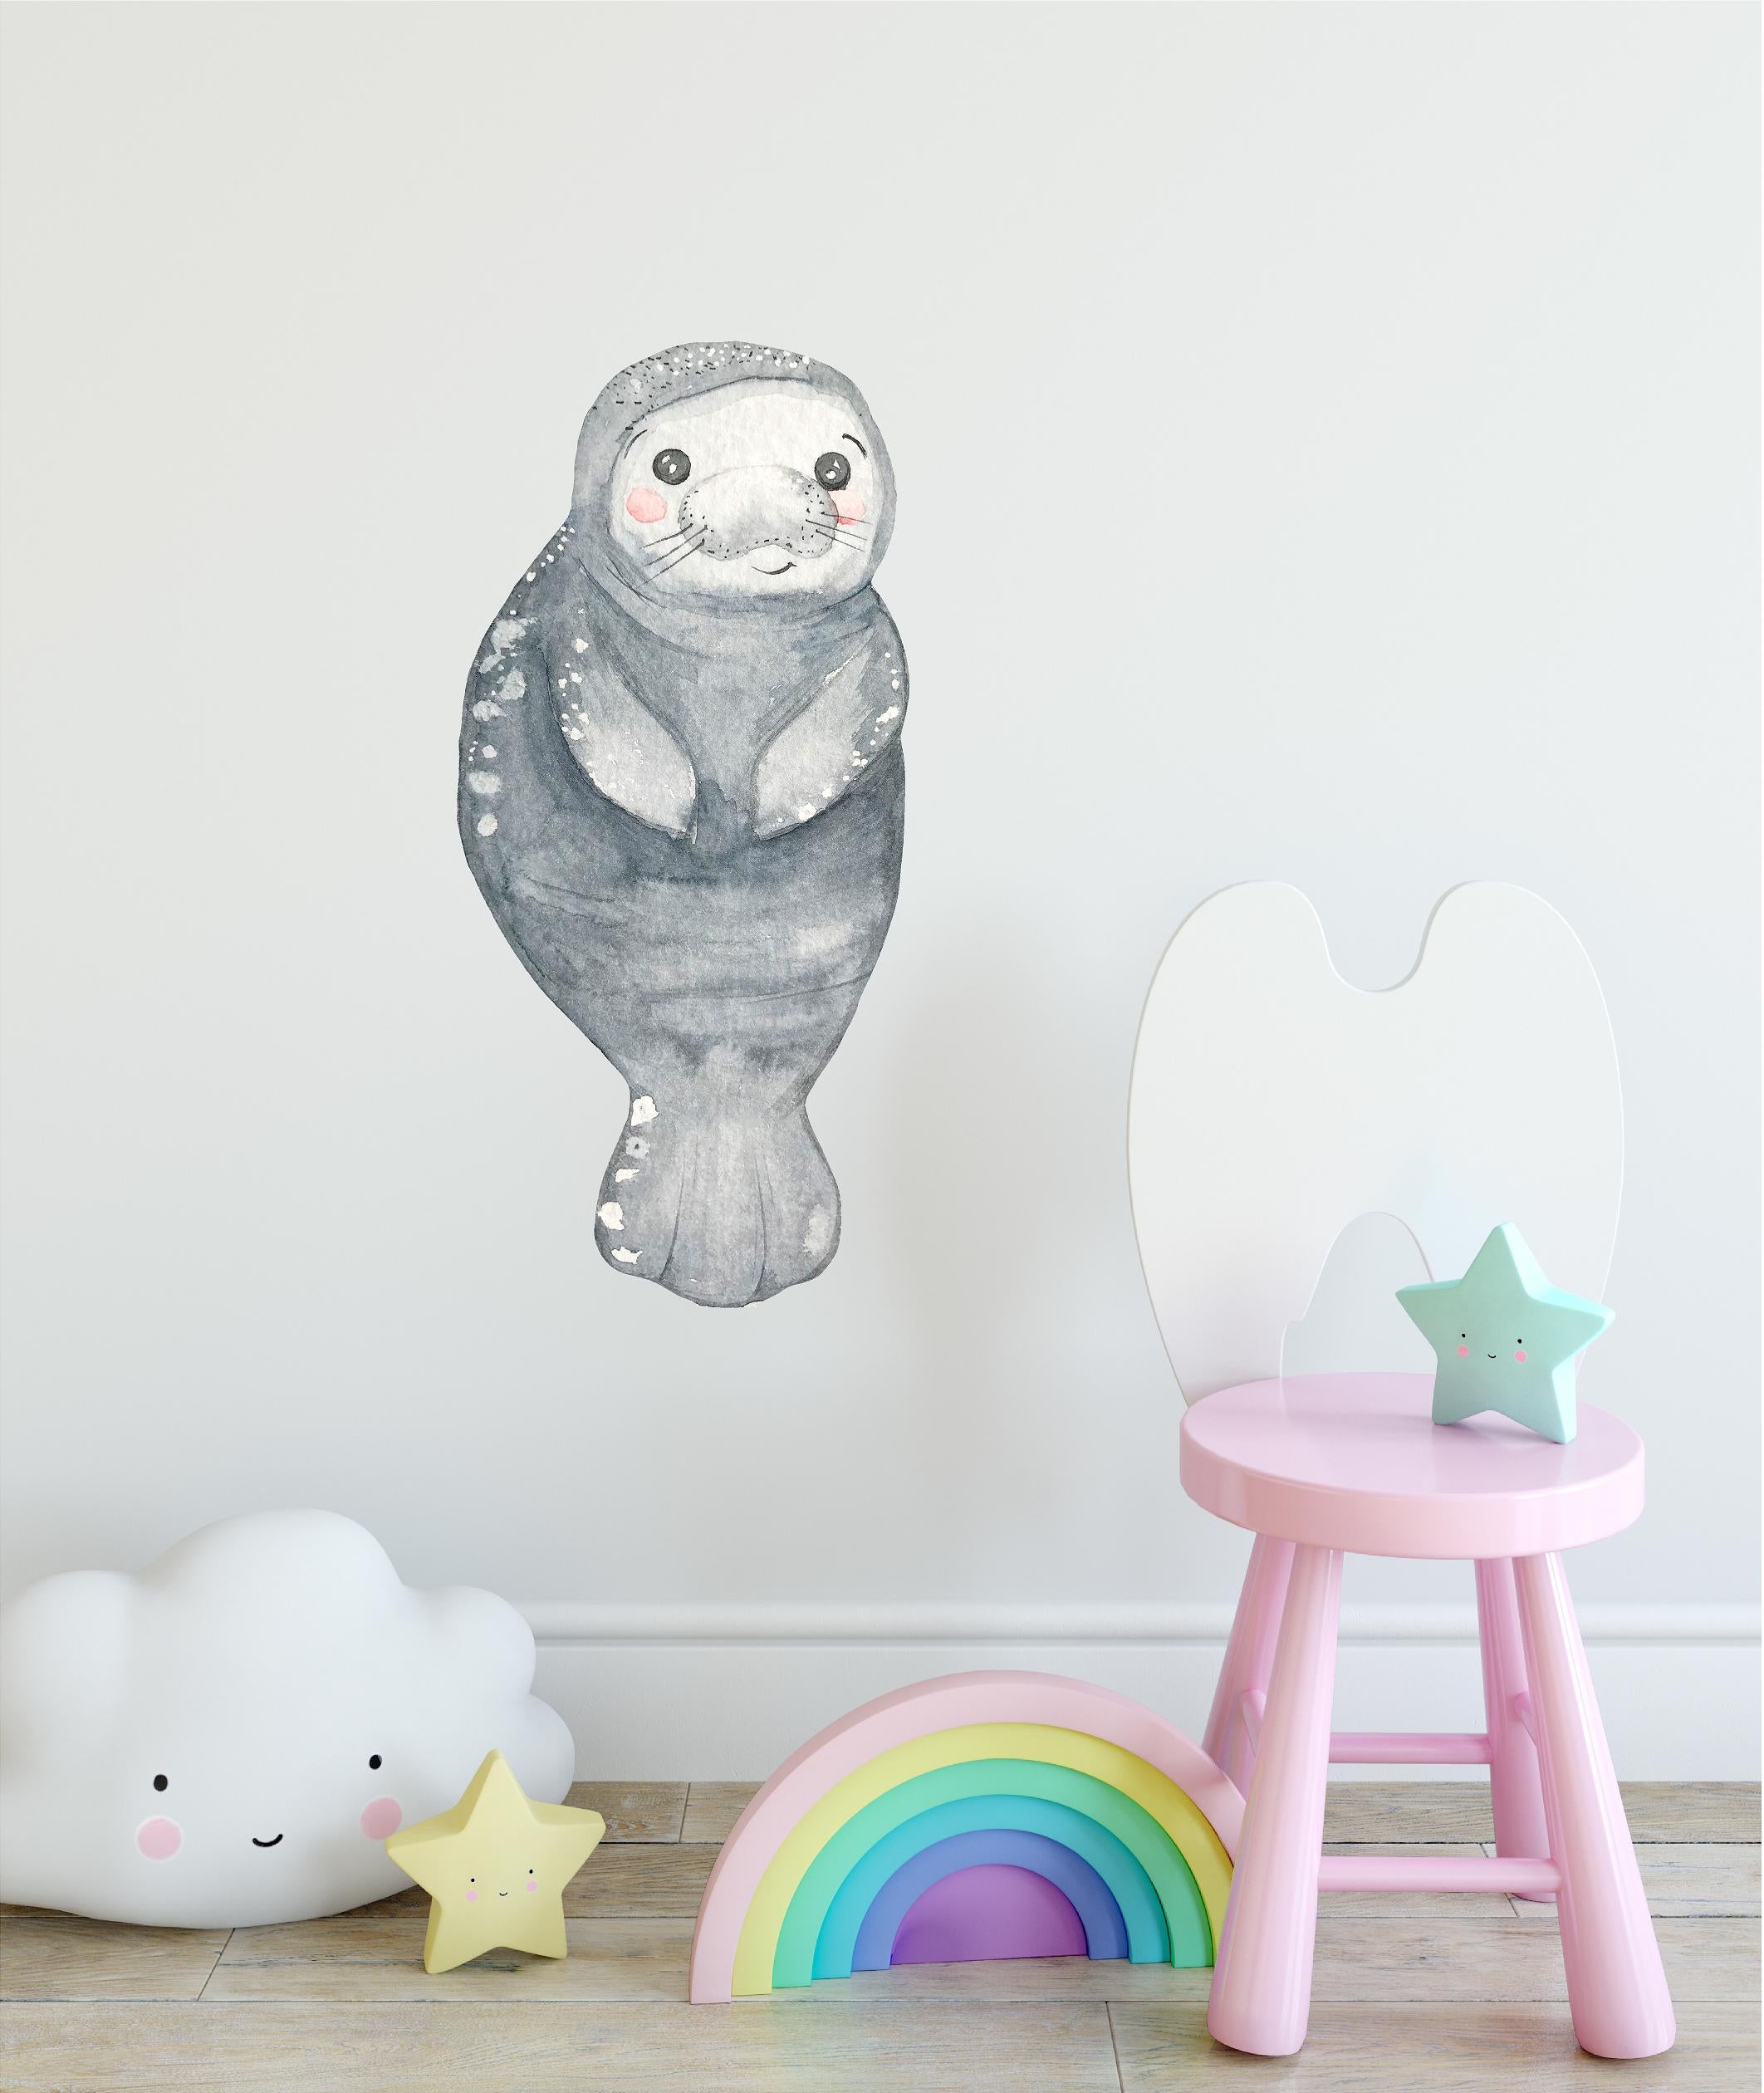 Baby Manatee Wall Decal Removable Fabric Vinyl Cute Watercolor Sea Cow Sea Animal Wall Sticker | DecalBaby